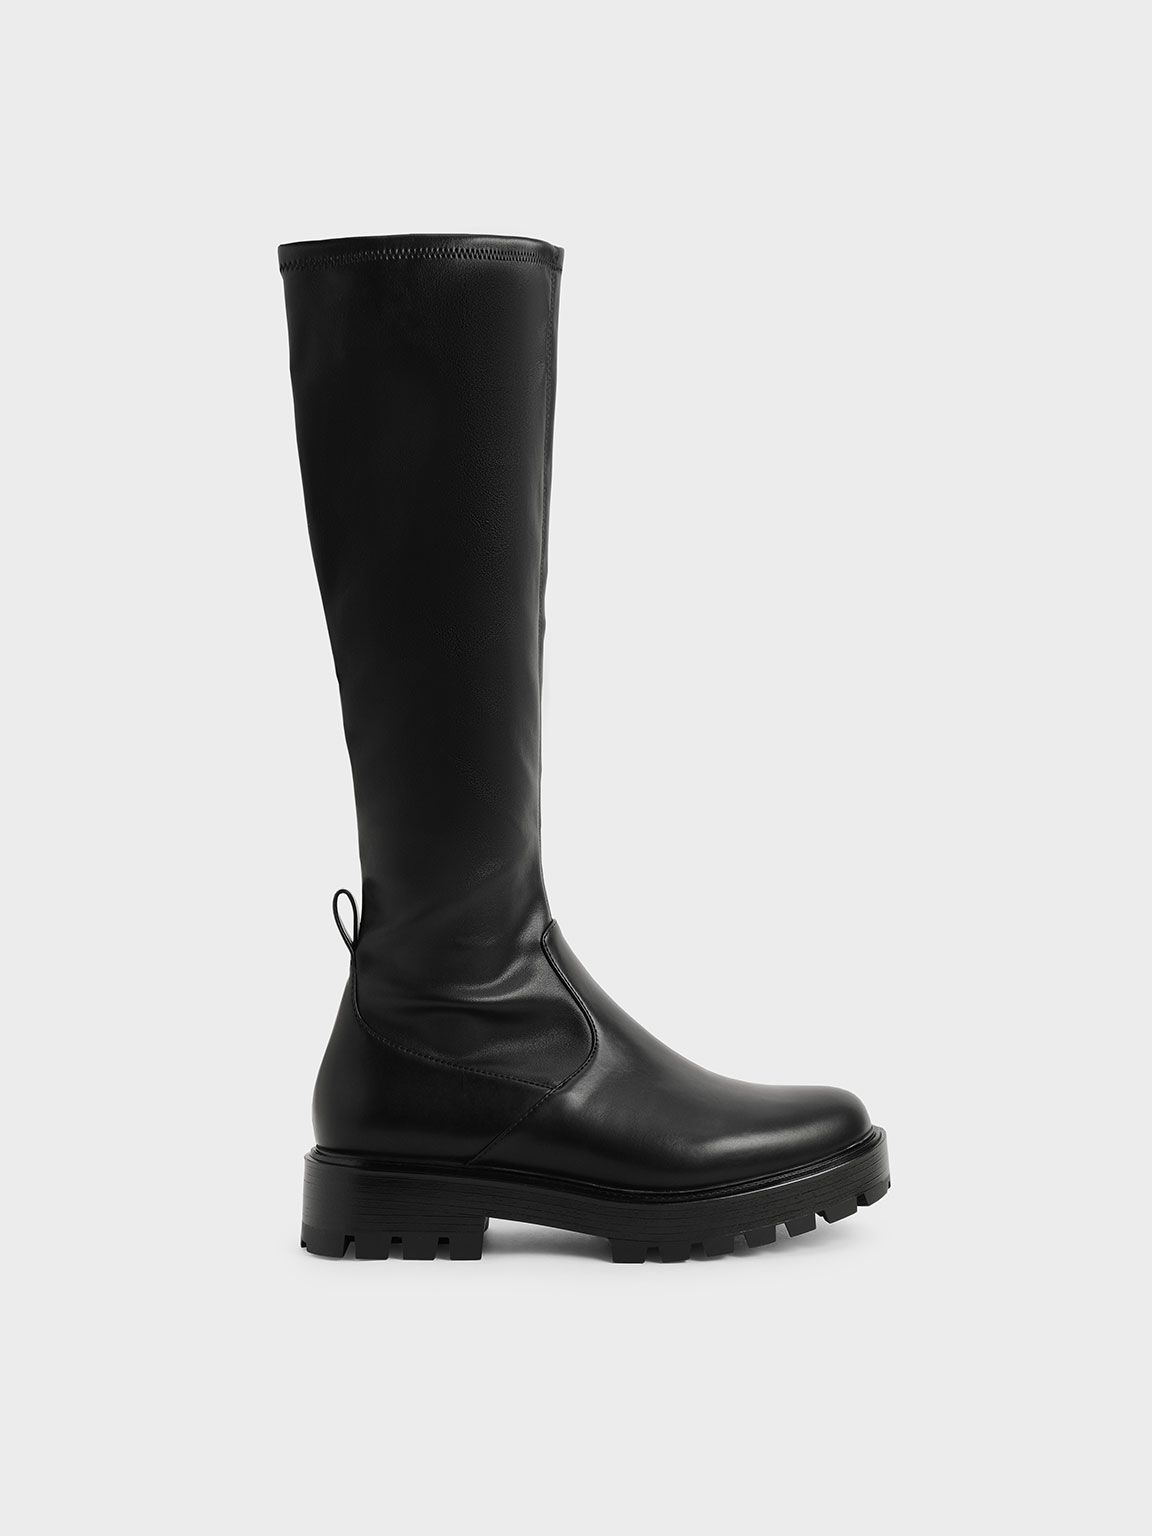 Black Knee-High Boots | CHARLES & KEITH